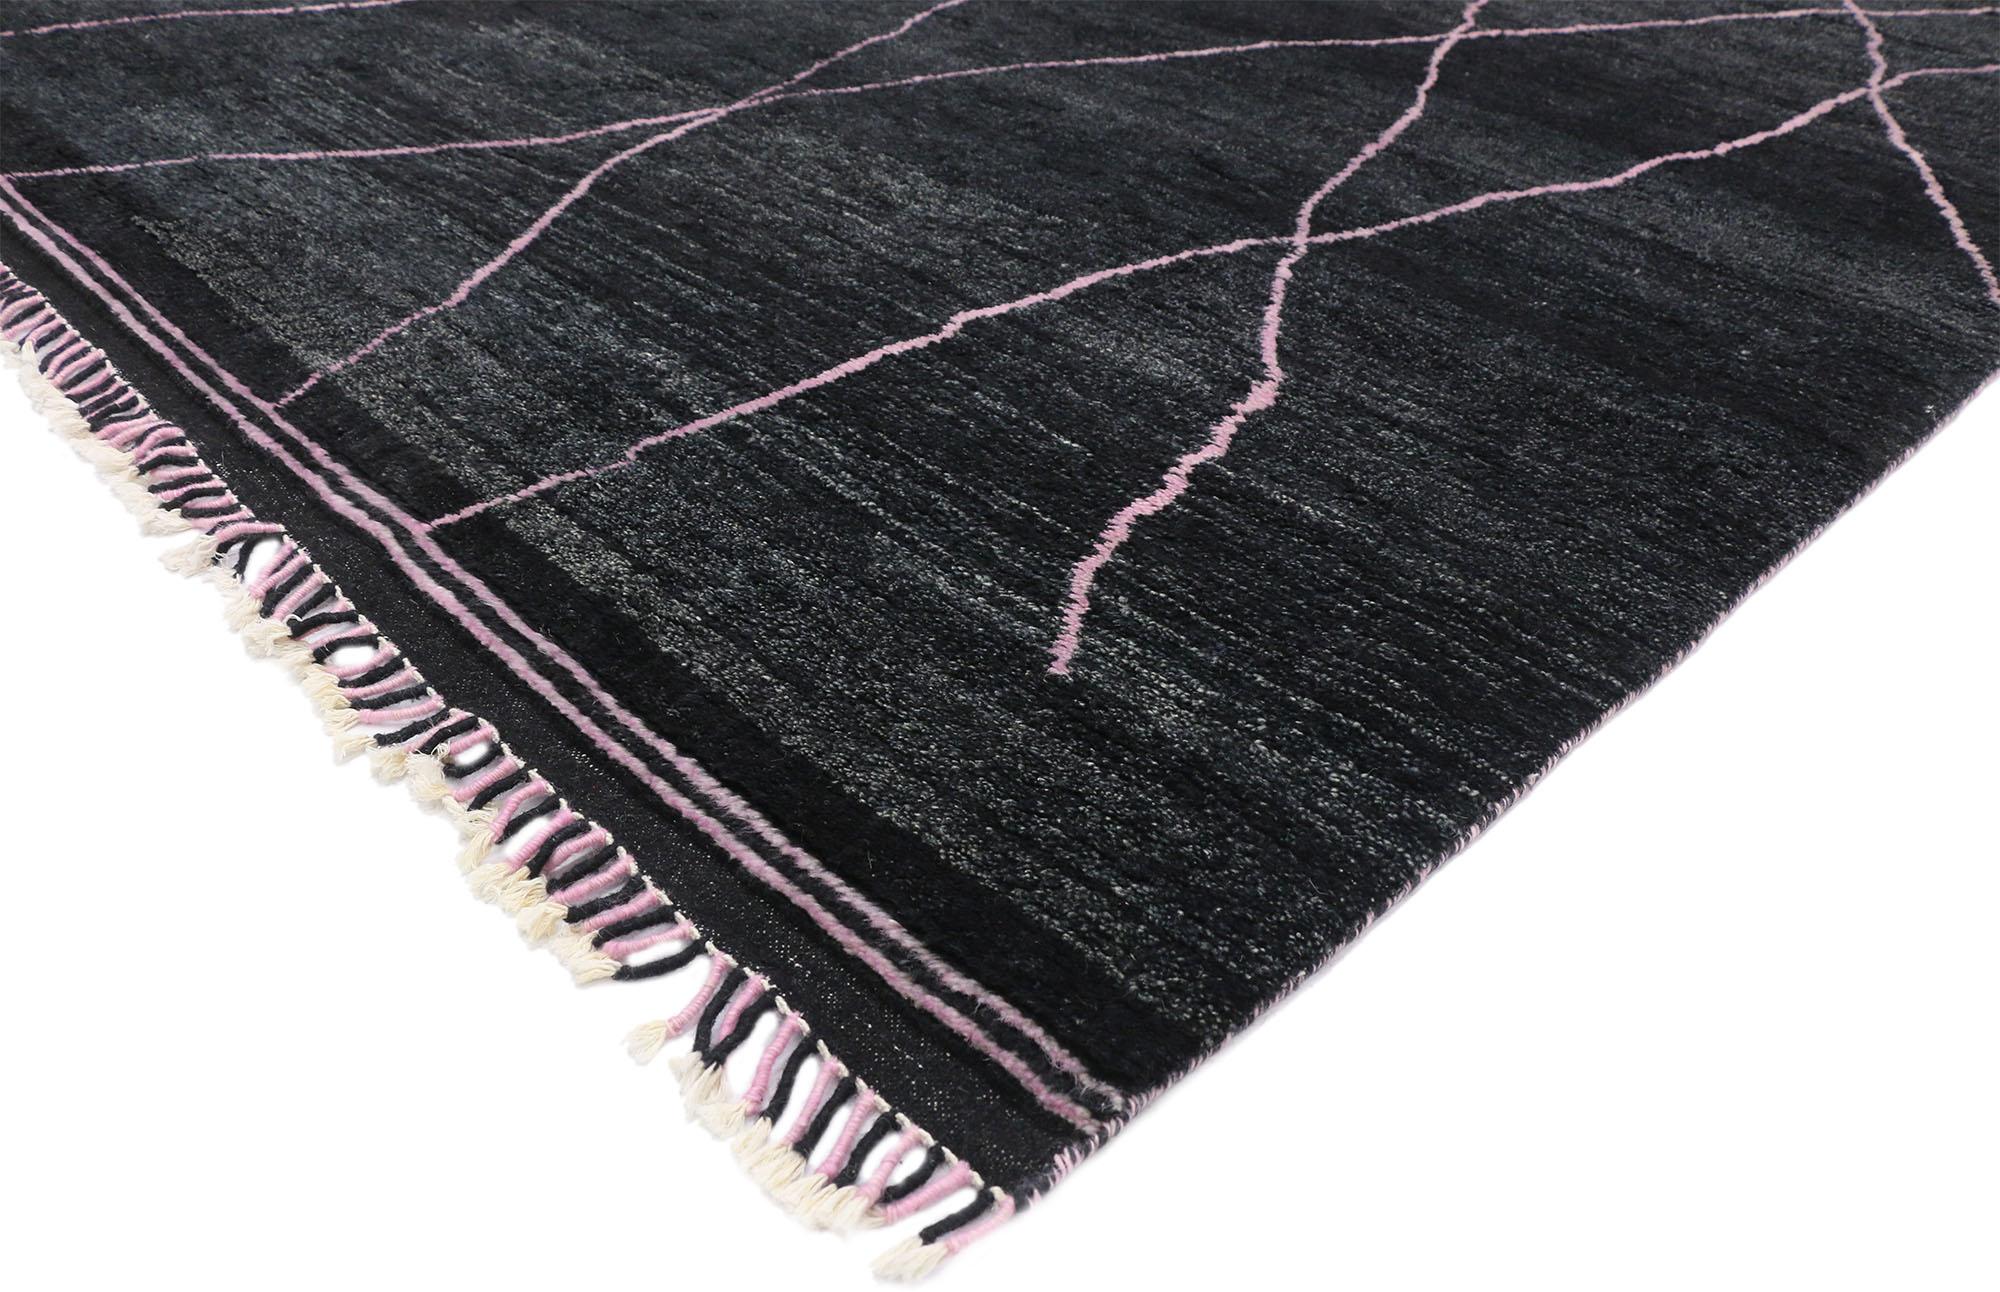 30479 New Contemporary Moroccan Rug with Minimalist Scandinavian Style 08'05 x 10'01. With its simplicity, plush pile and Mid-Century Modern Bohemian vibes, this hand knotted wool contemporary Moroccan style rug is a captivating vision of woven